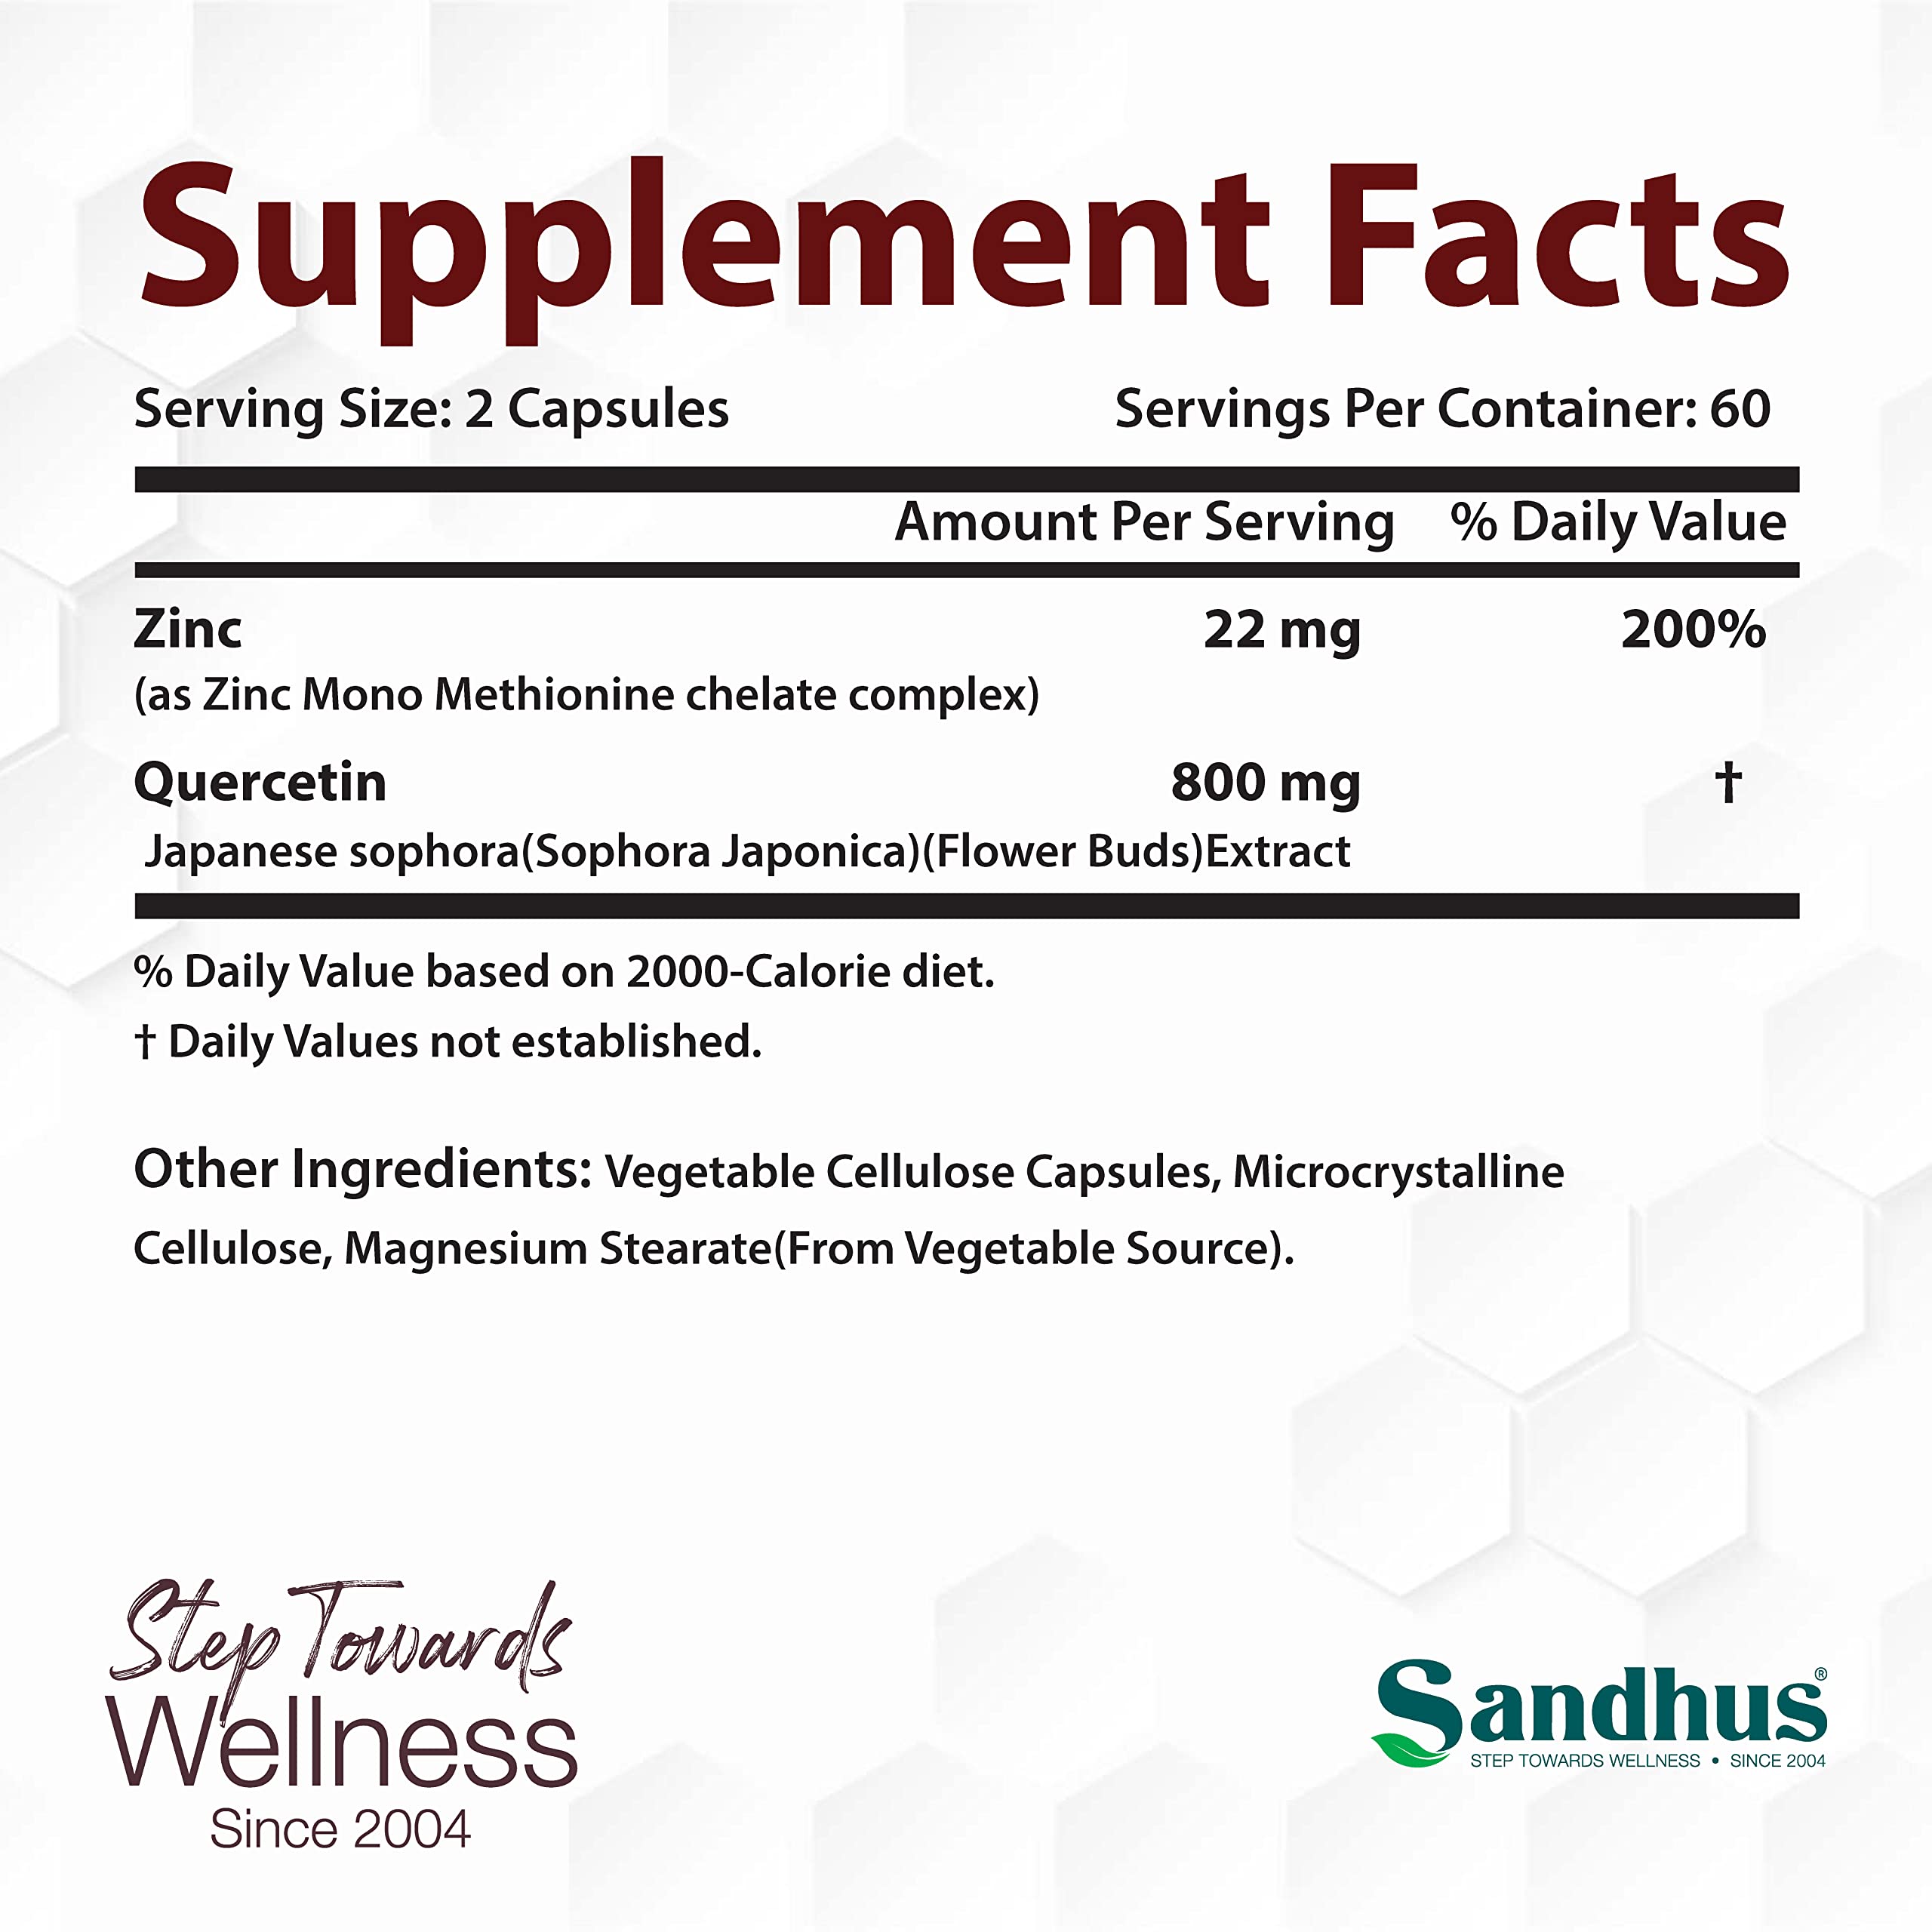 Sandhu's Zinc Quercetin Capsules & Pure Bovine Colostrum Powder Supplement for Humans| Immune, Gut and Muscle Health Support| Non-GMO | Made in USA